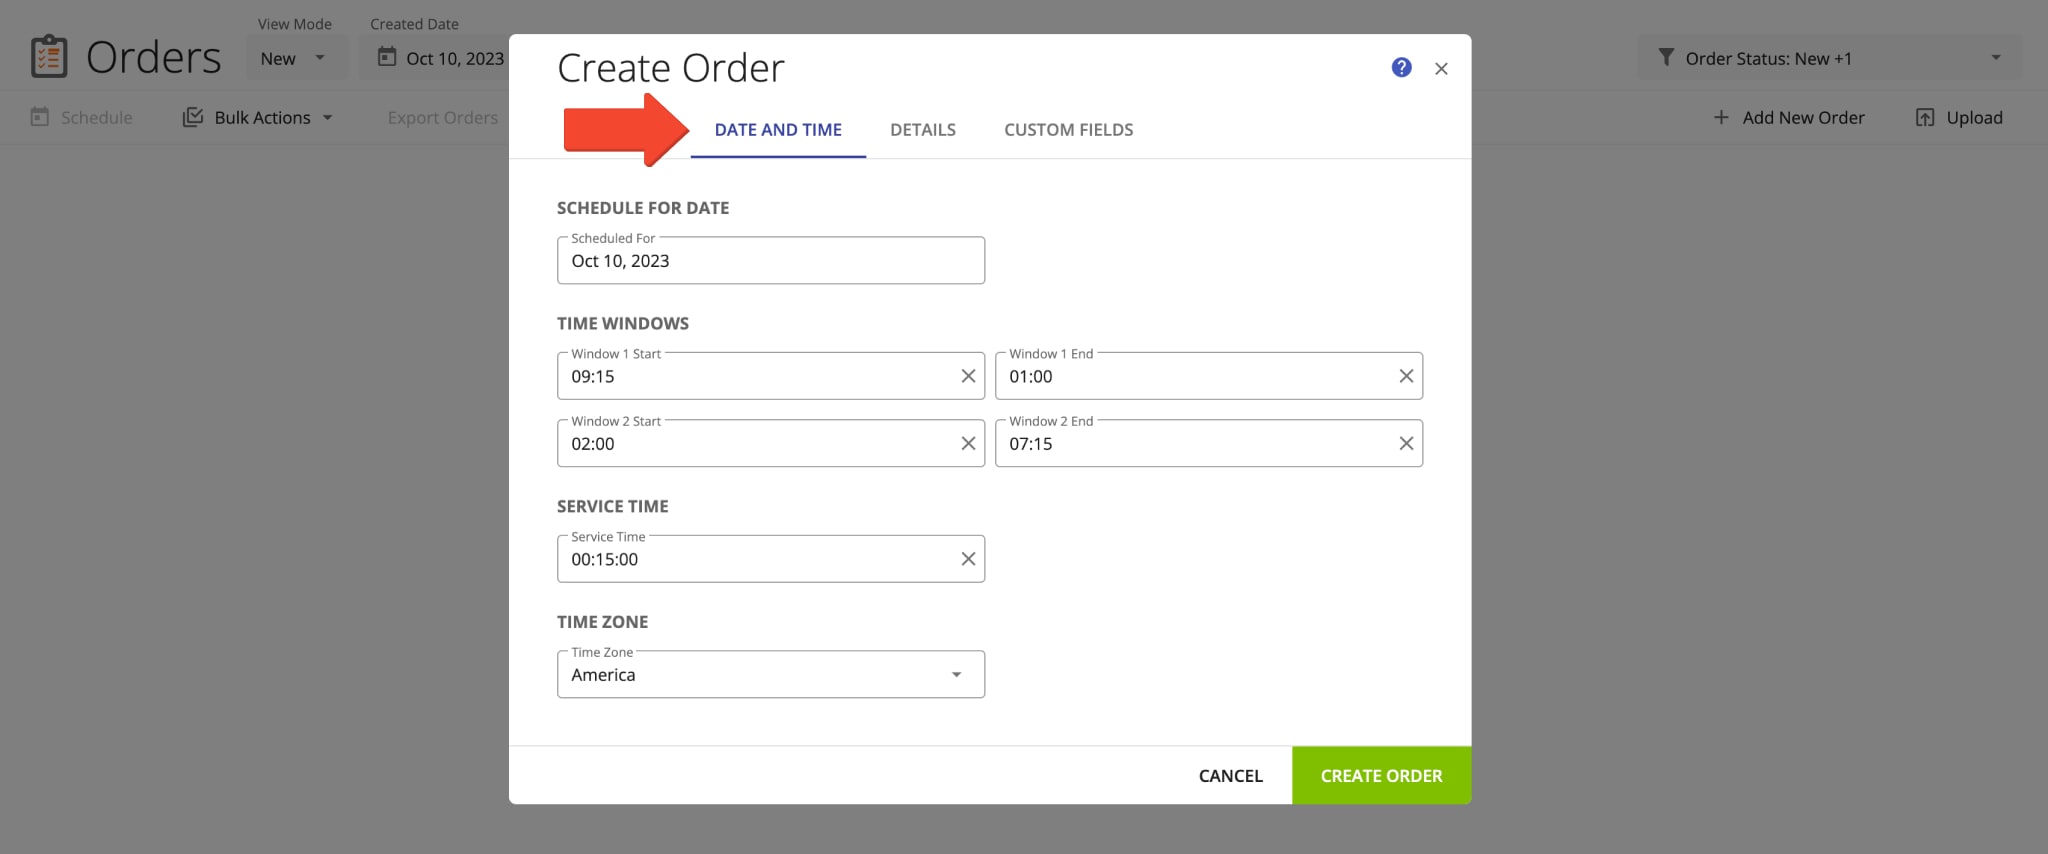 Add order time details such as the order Scheduled For Date, time windows, etc.